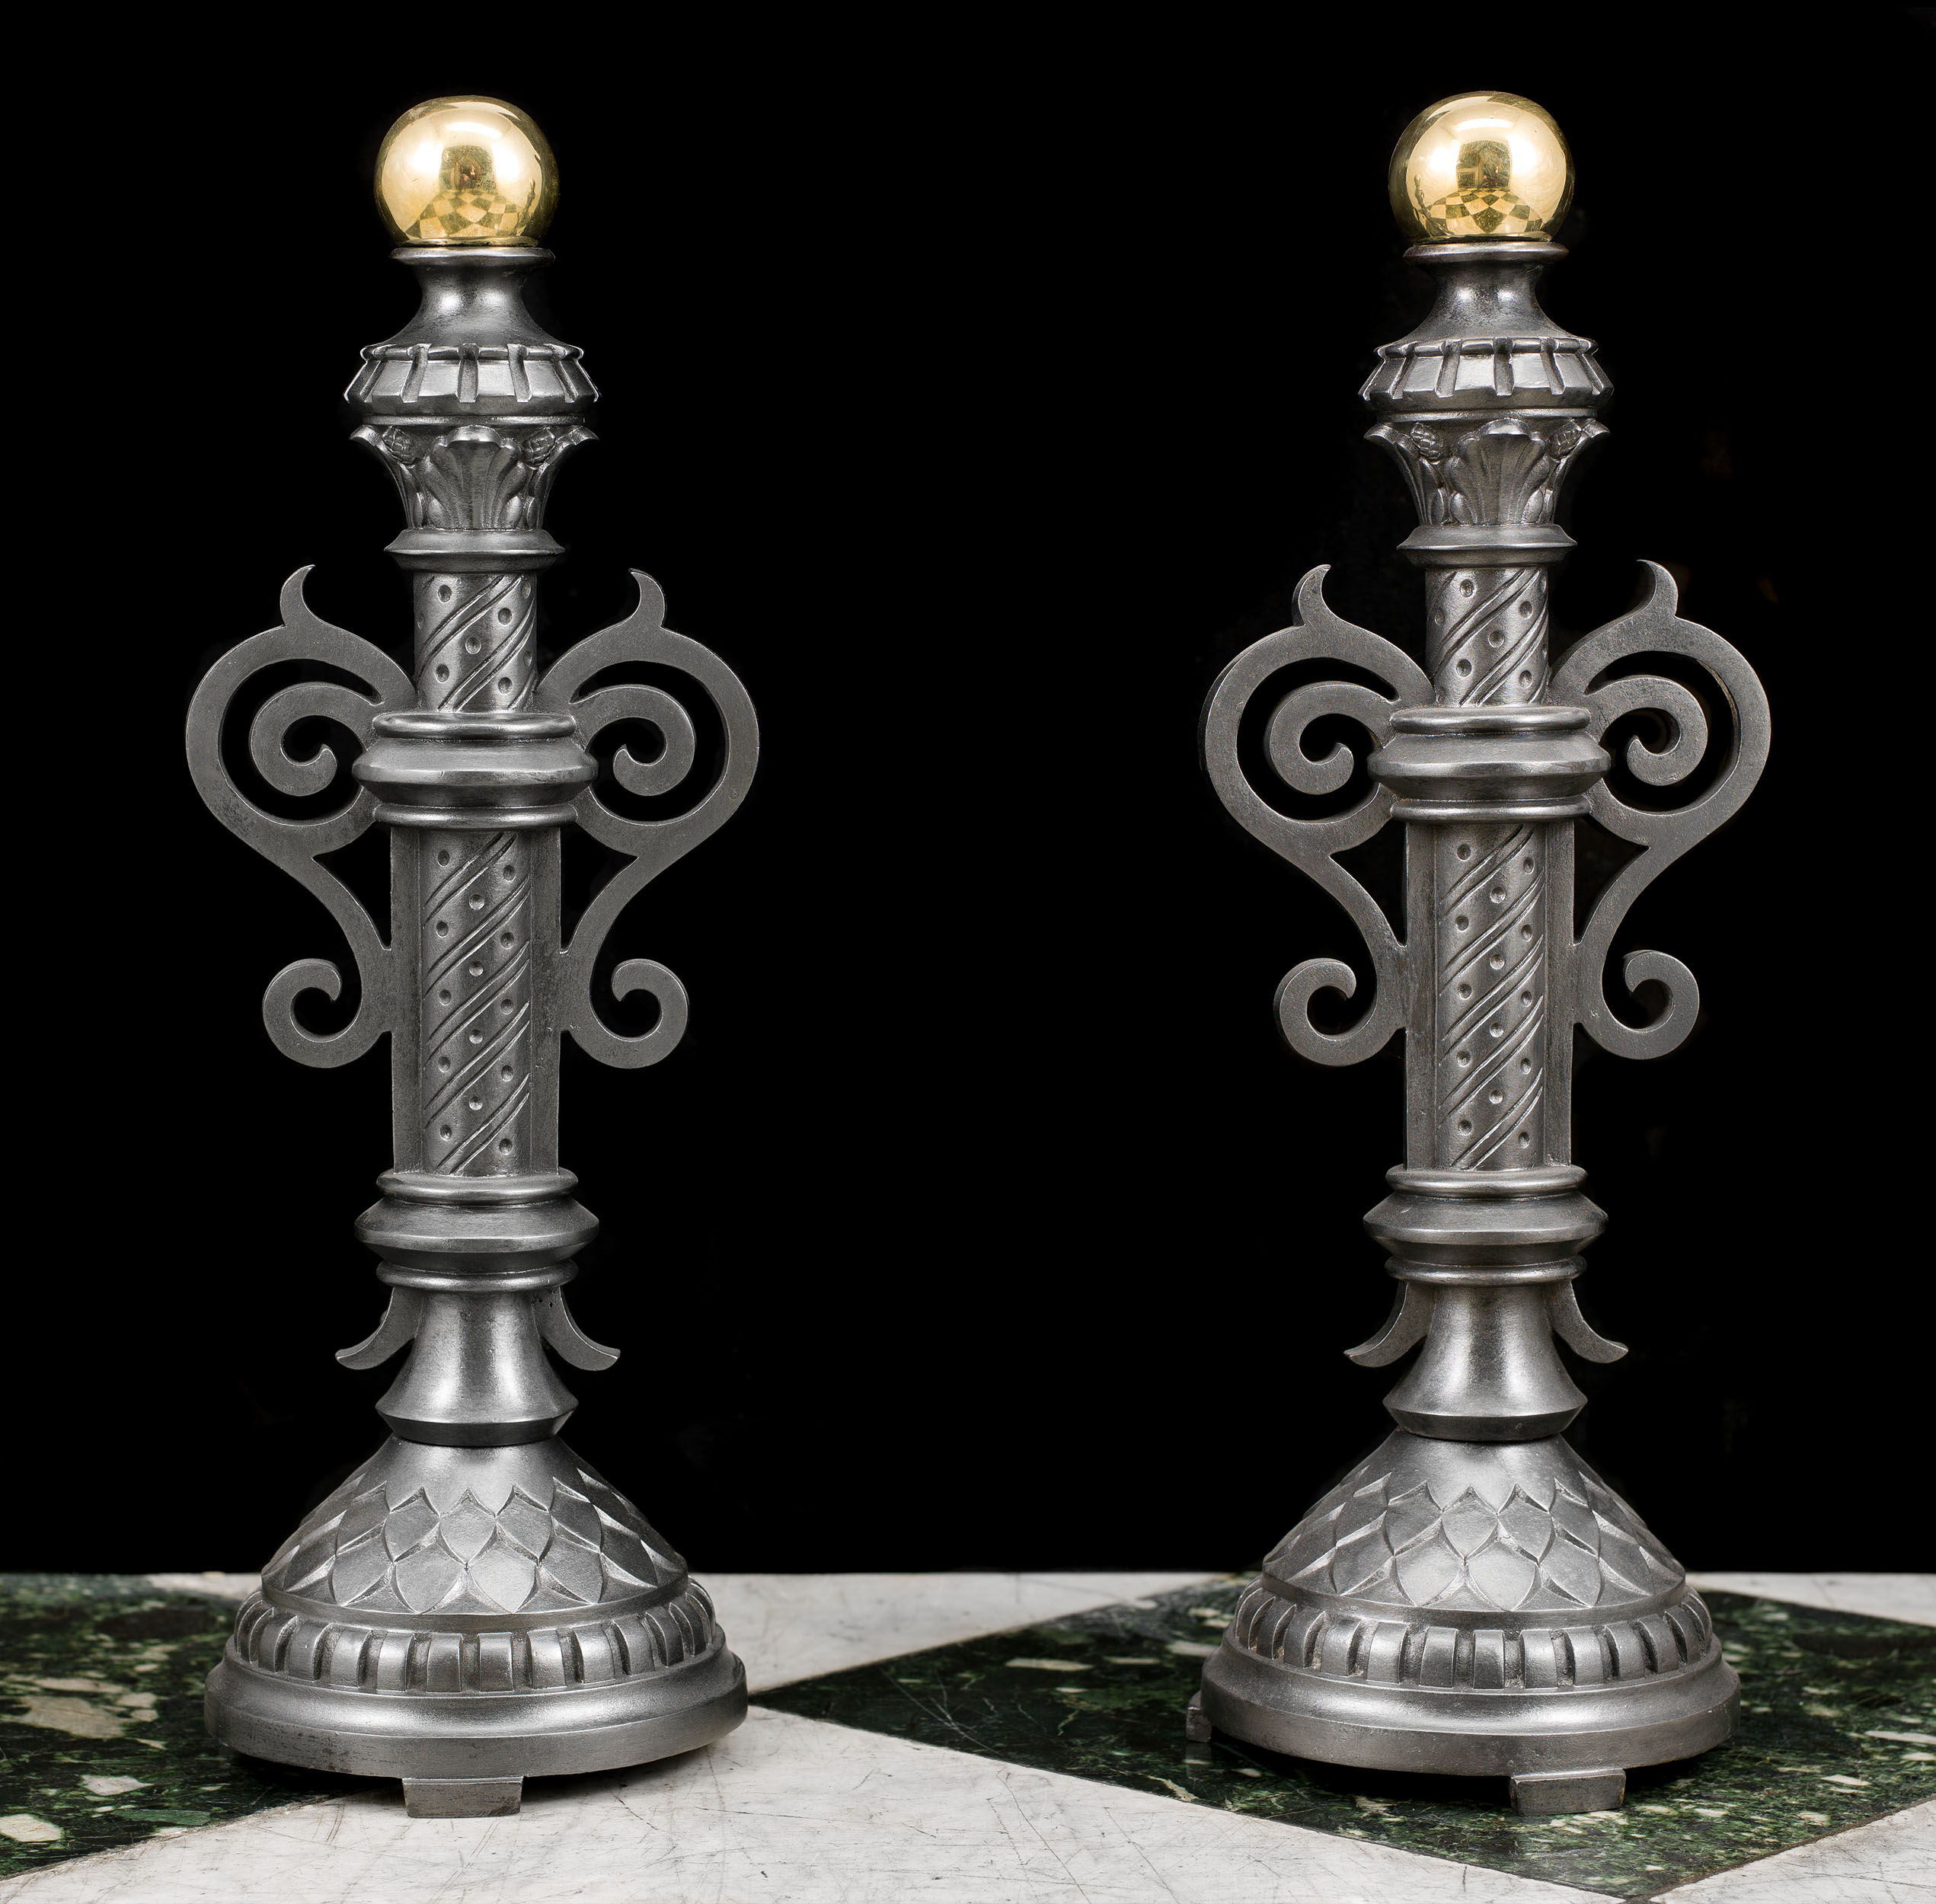  A Pair of Baroque Style Antique Fire Dogs